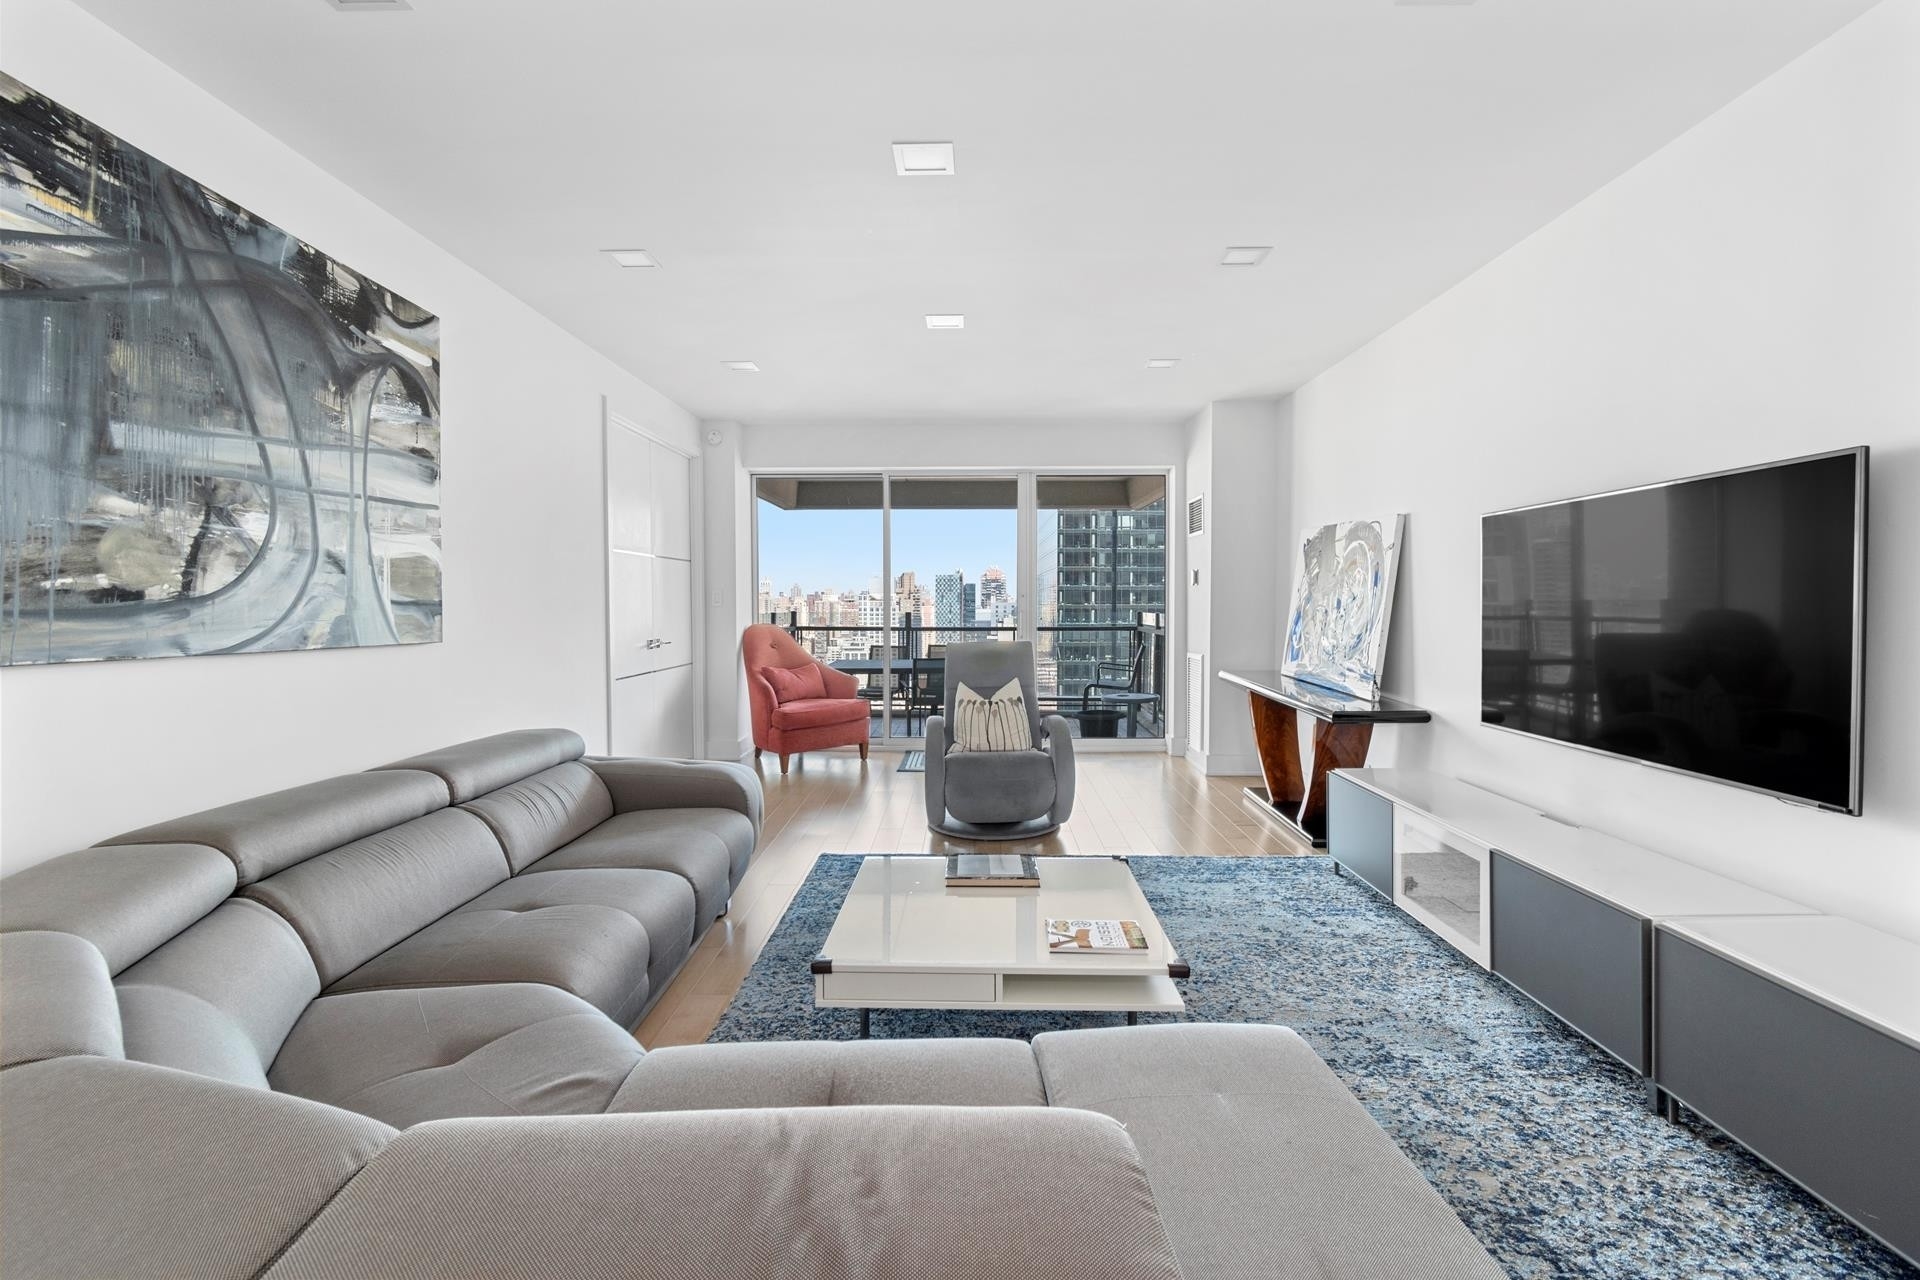 Co-op Properties for Sale at The Sovereign, 425 E 58TH ST, 33A Sutton Place, New York, New York 10022